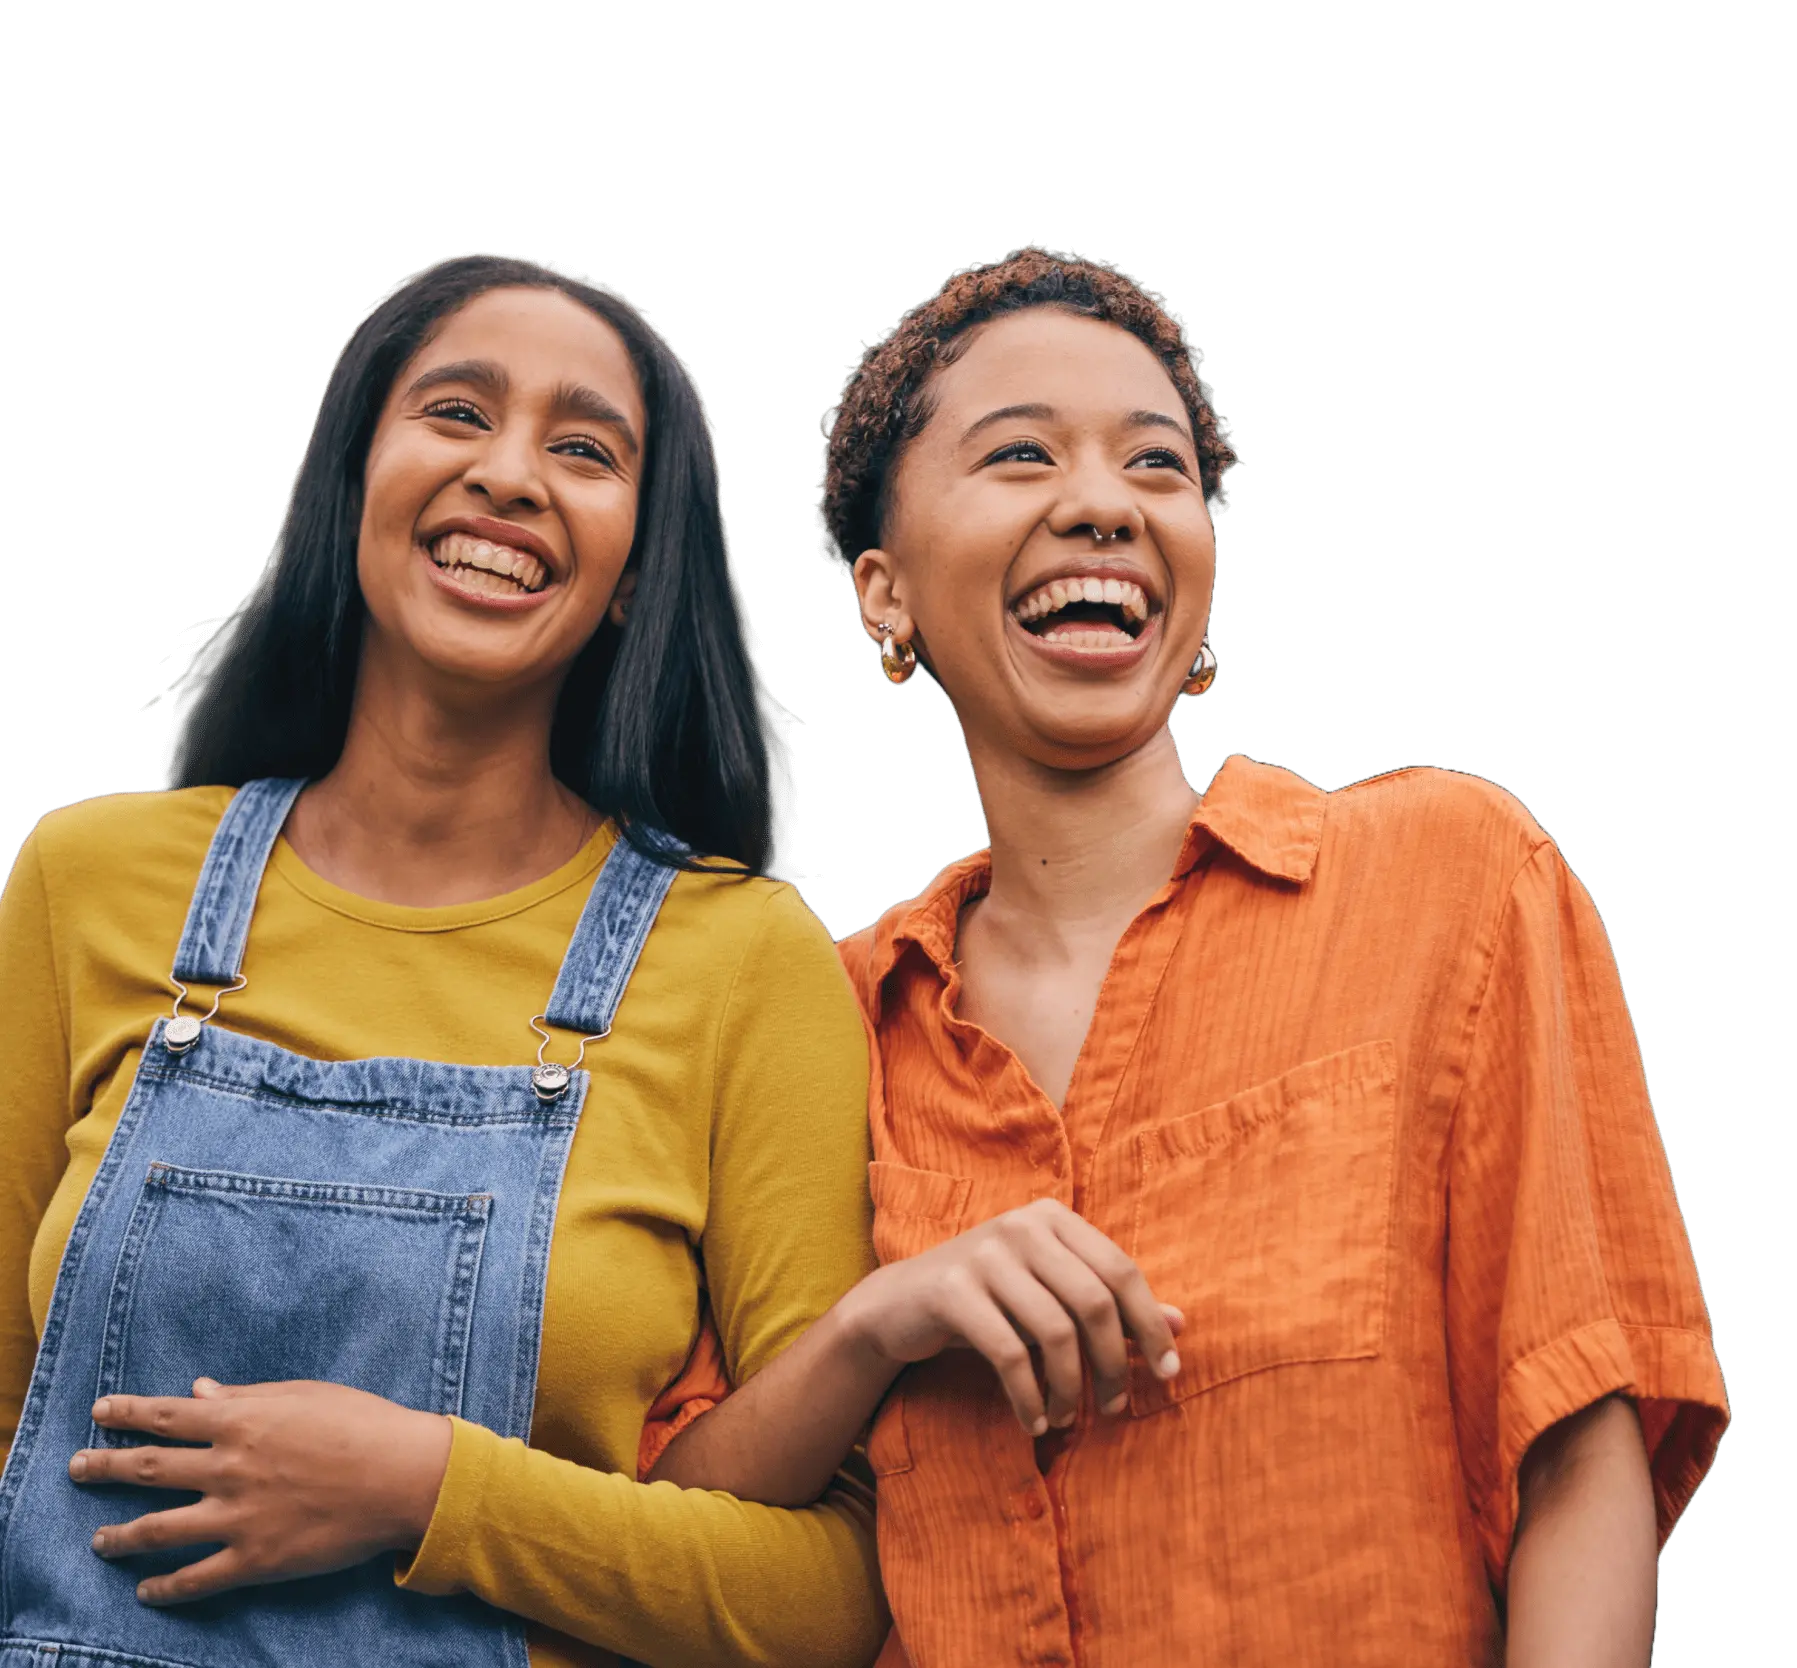 Cutout of two young friends walking arm-in-arm laughing against a transparent background